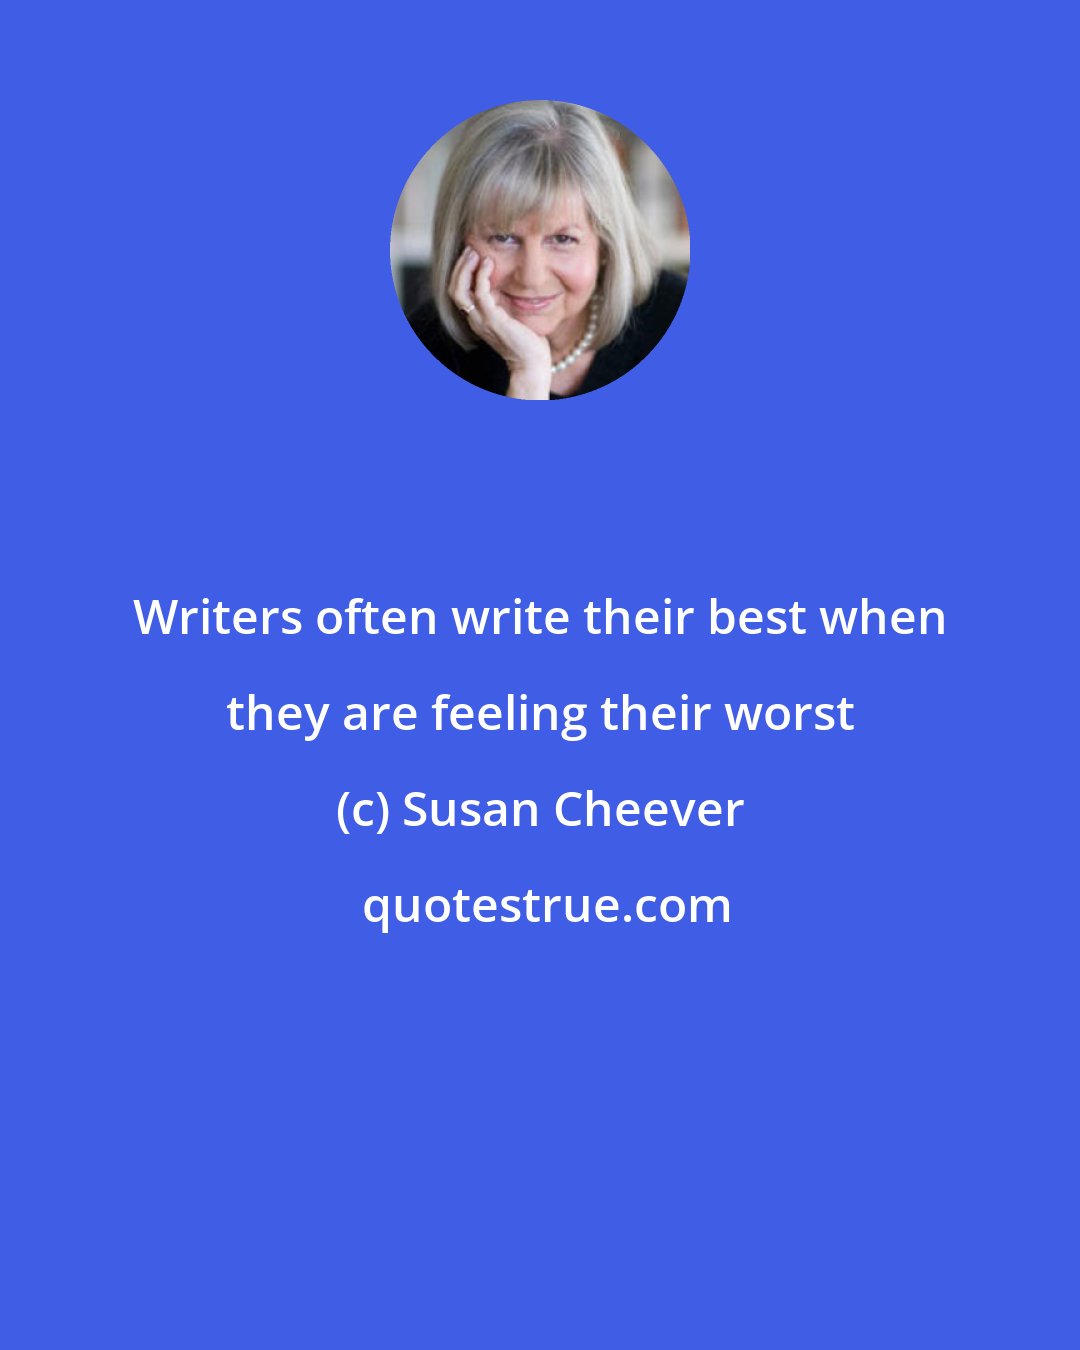 Susan Cheever: Writers often write their best when they are feeling their worst